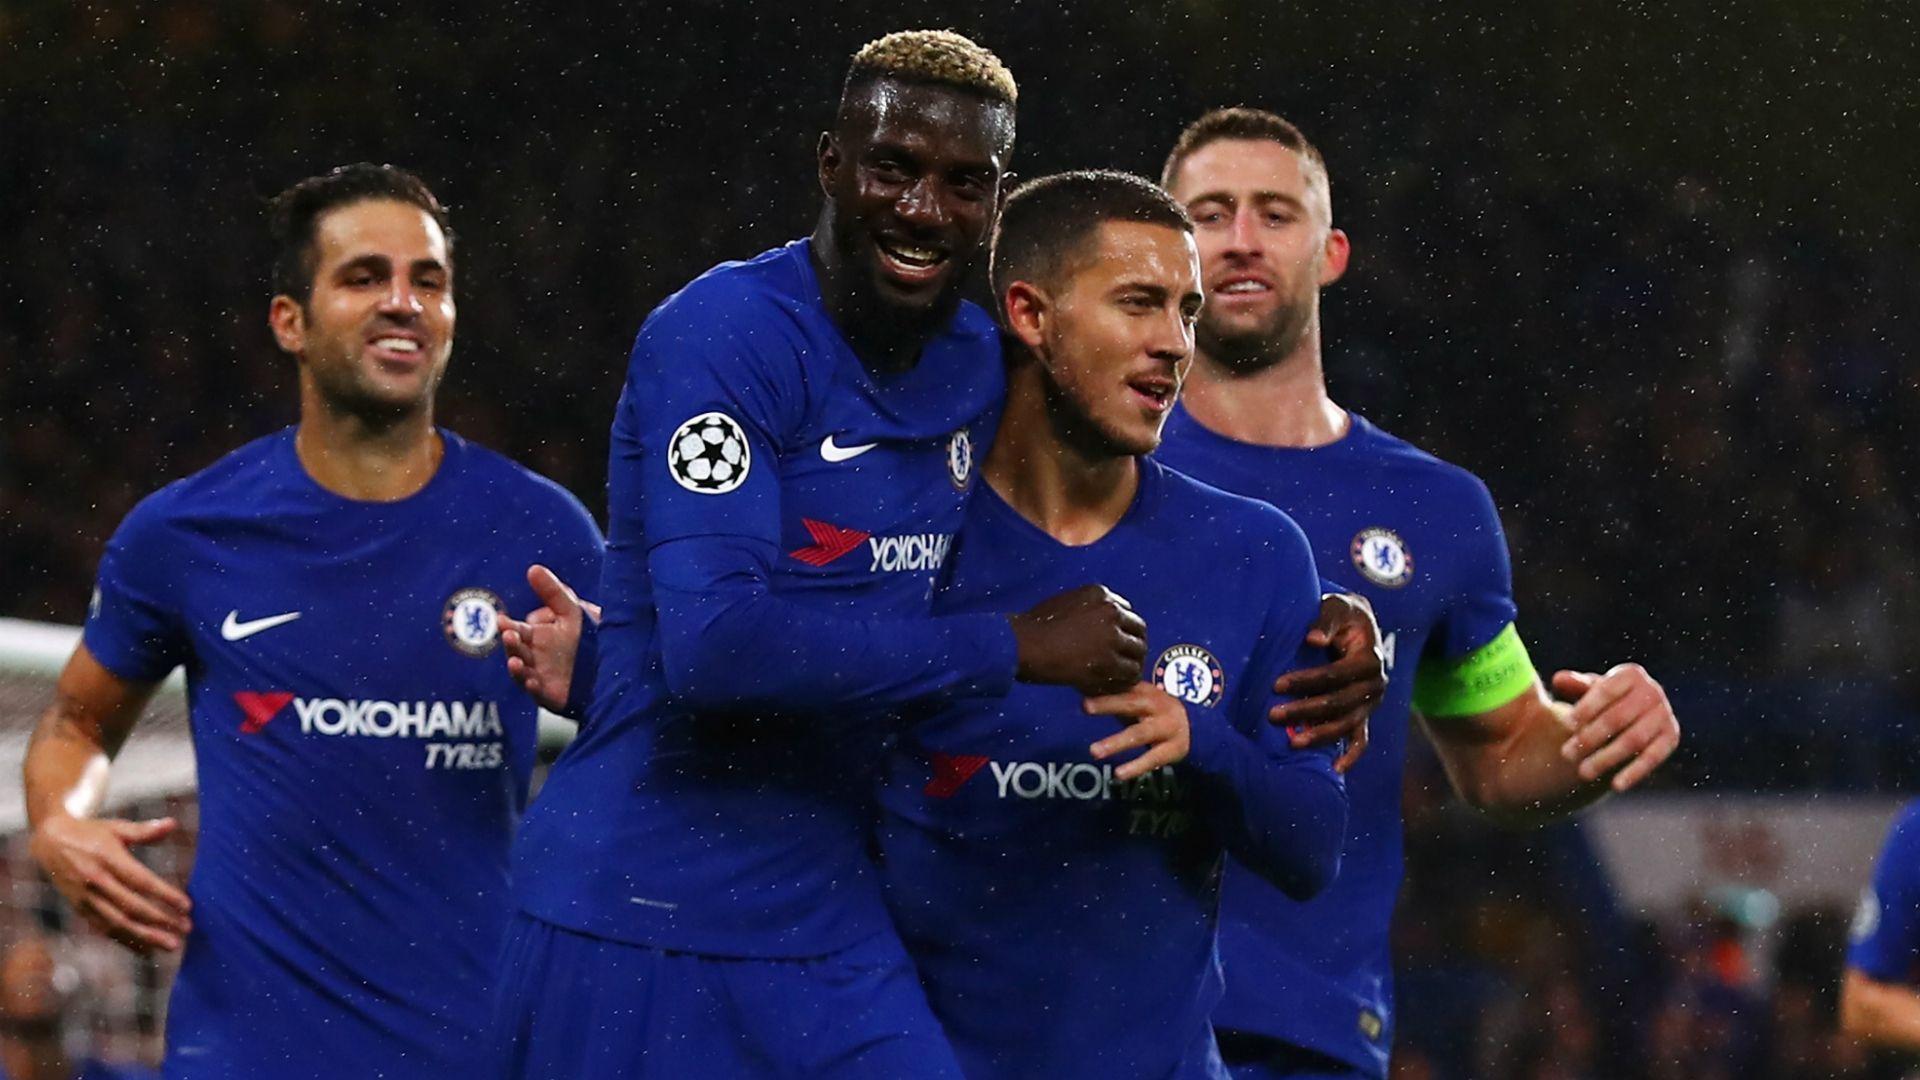 Bakayoko fit after car accident and Hazard ready to start, says